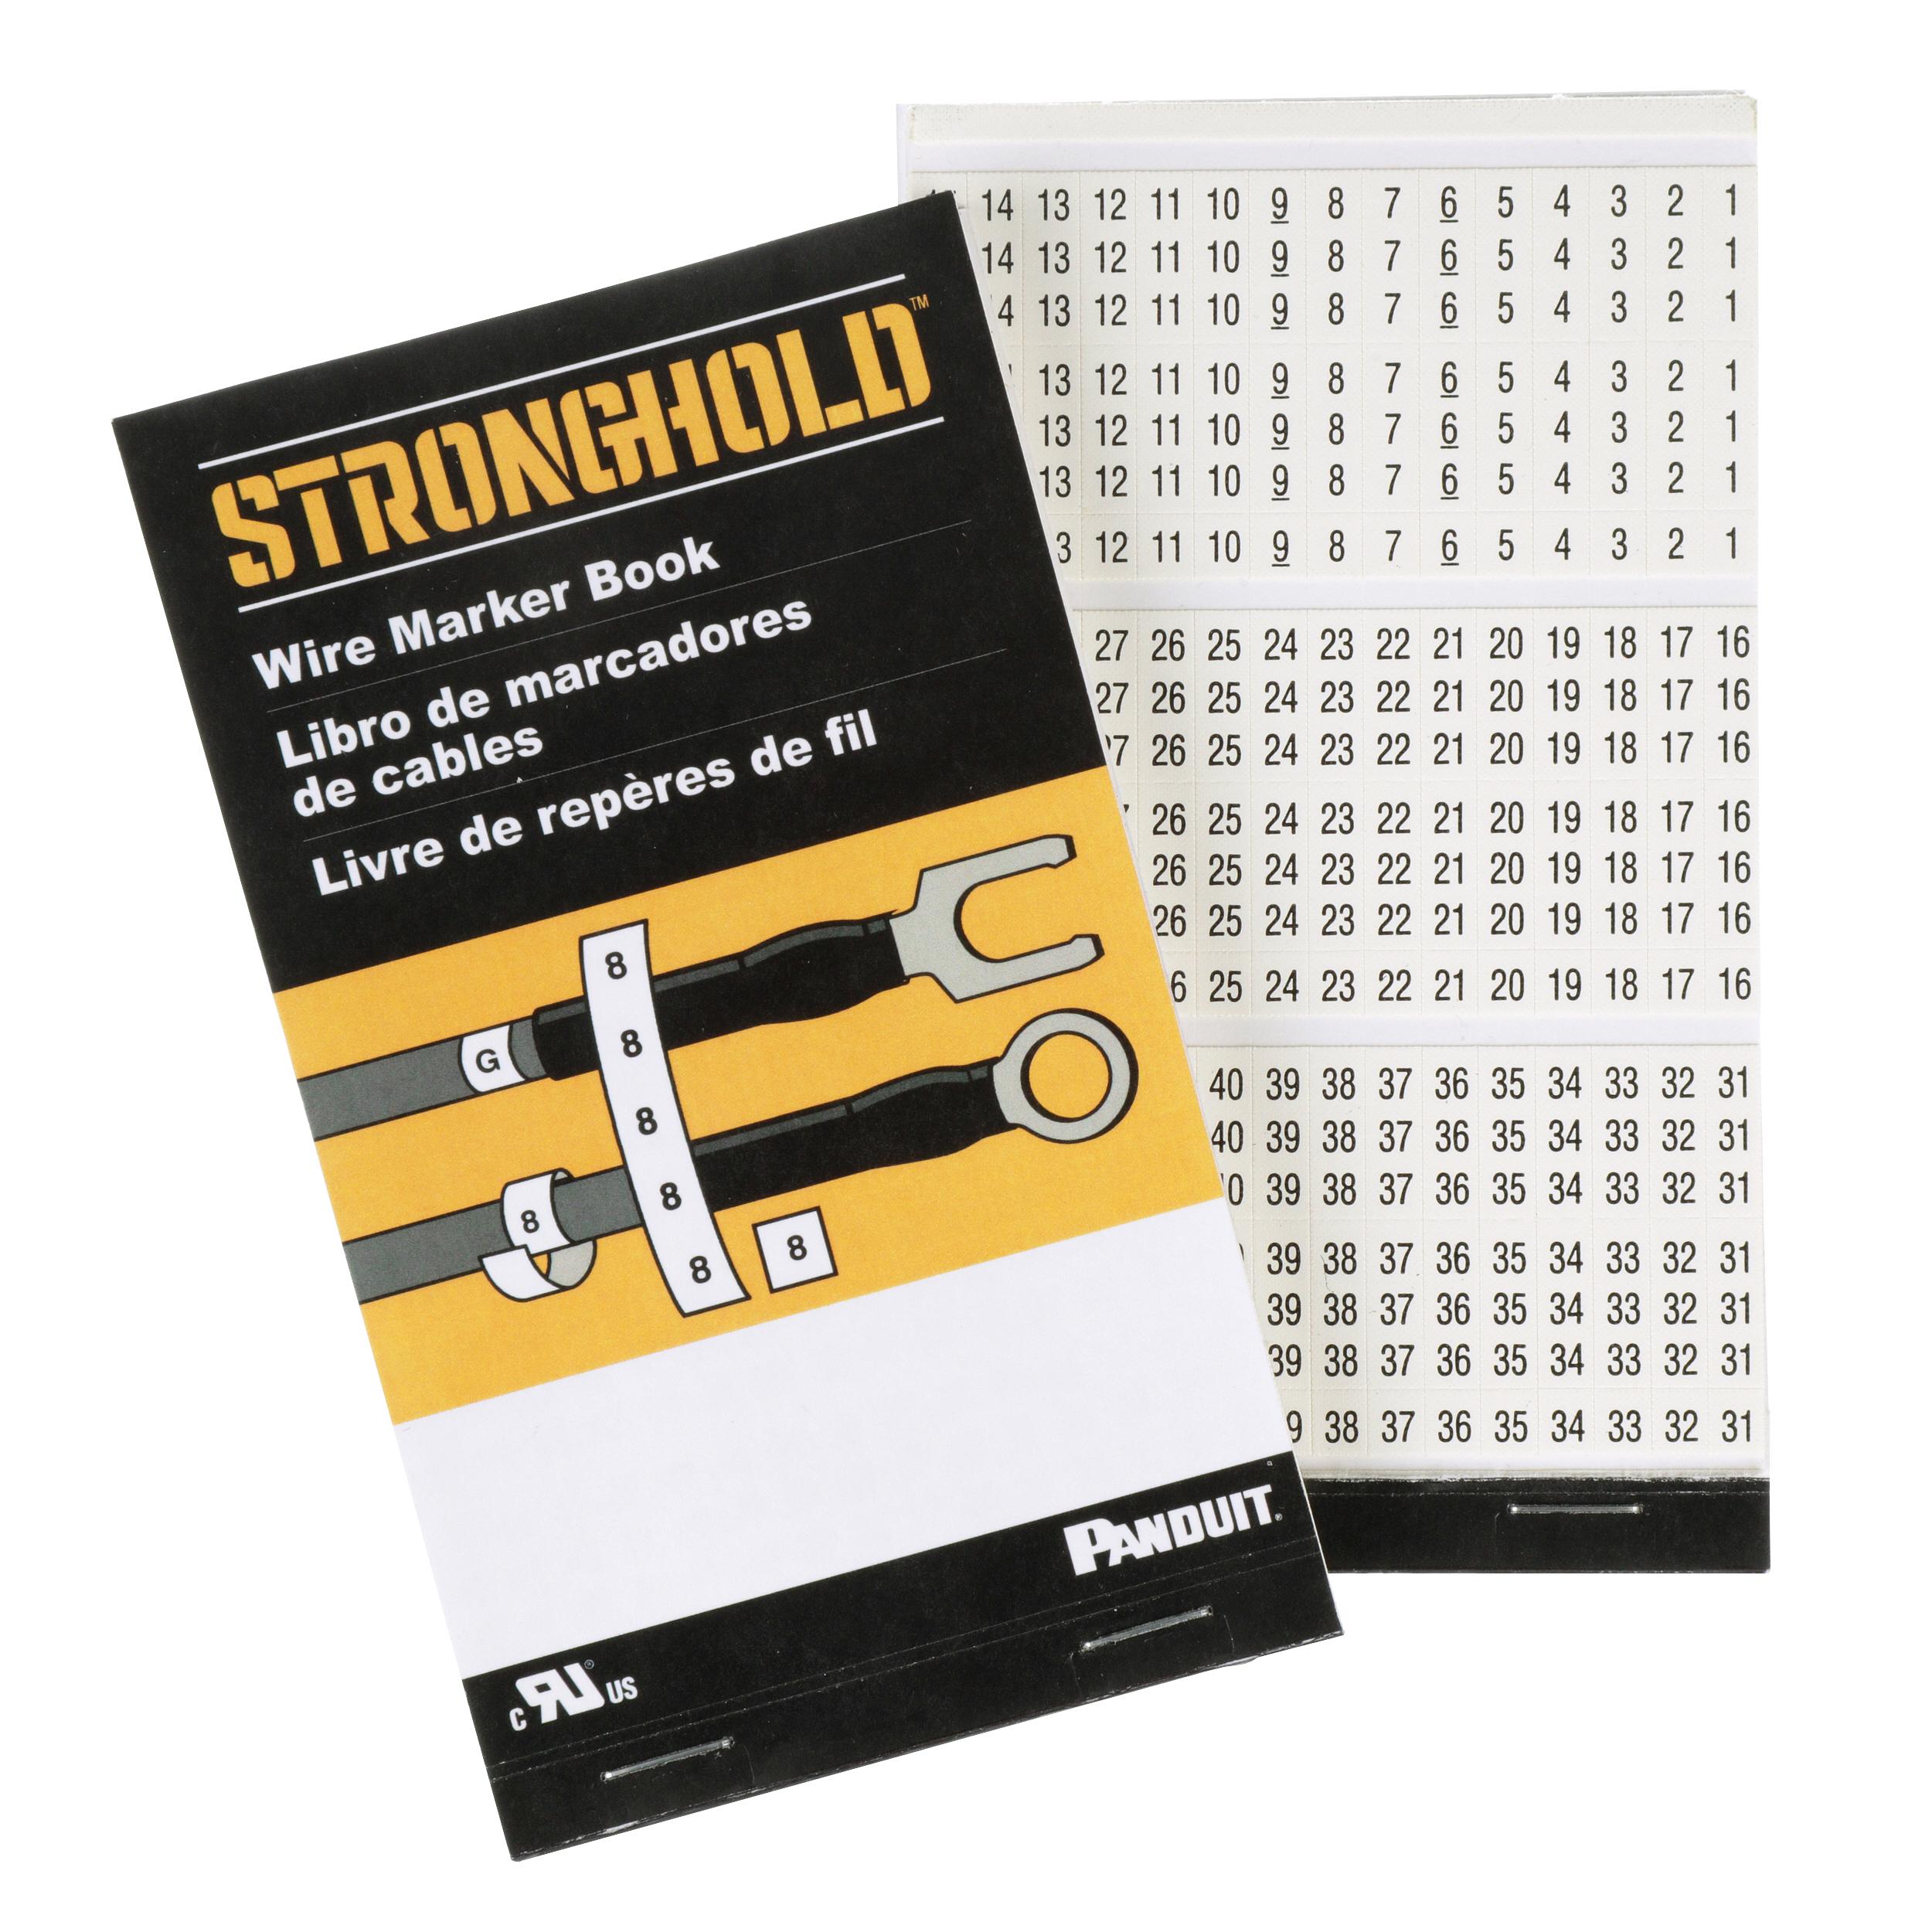 Panduit PCMB-16 StrongHold PCMB-16 Pre-Printed Wire Marker Books